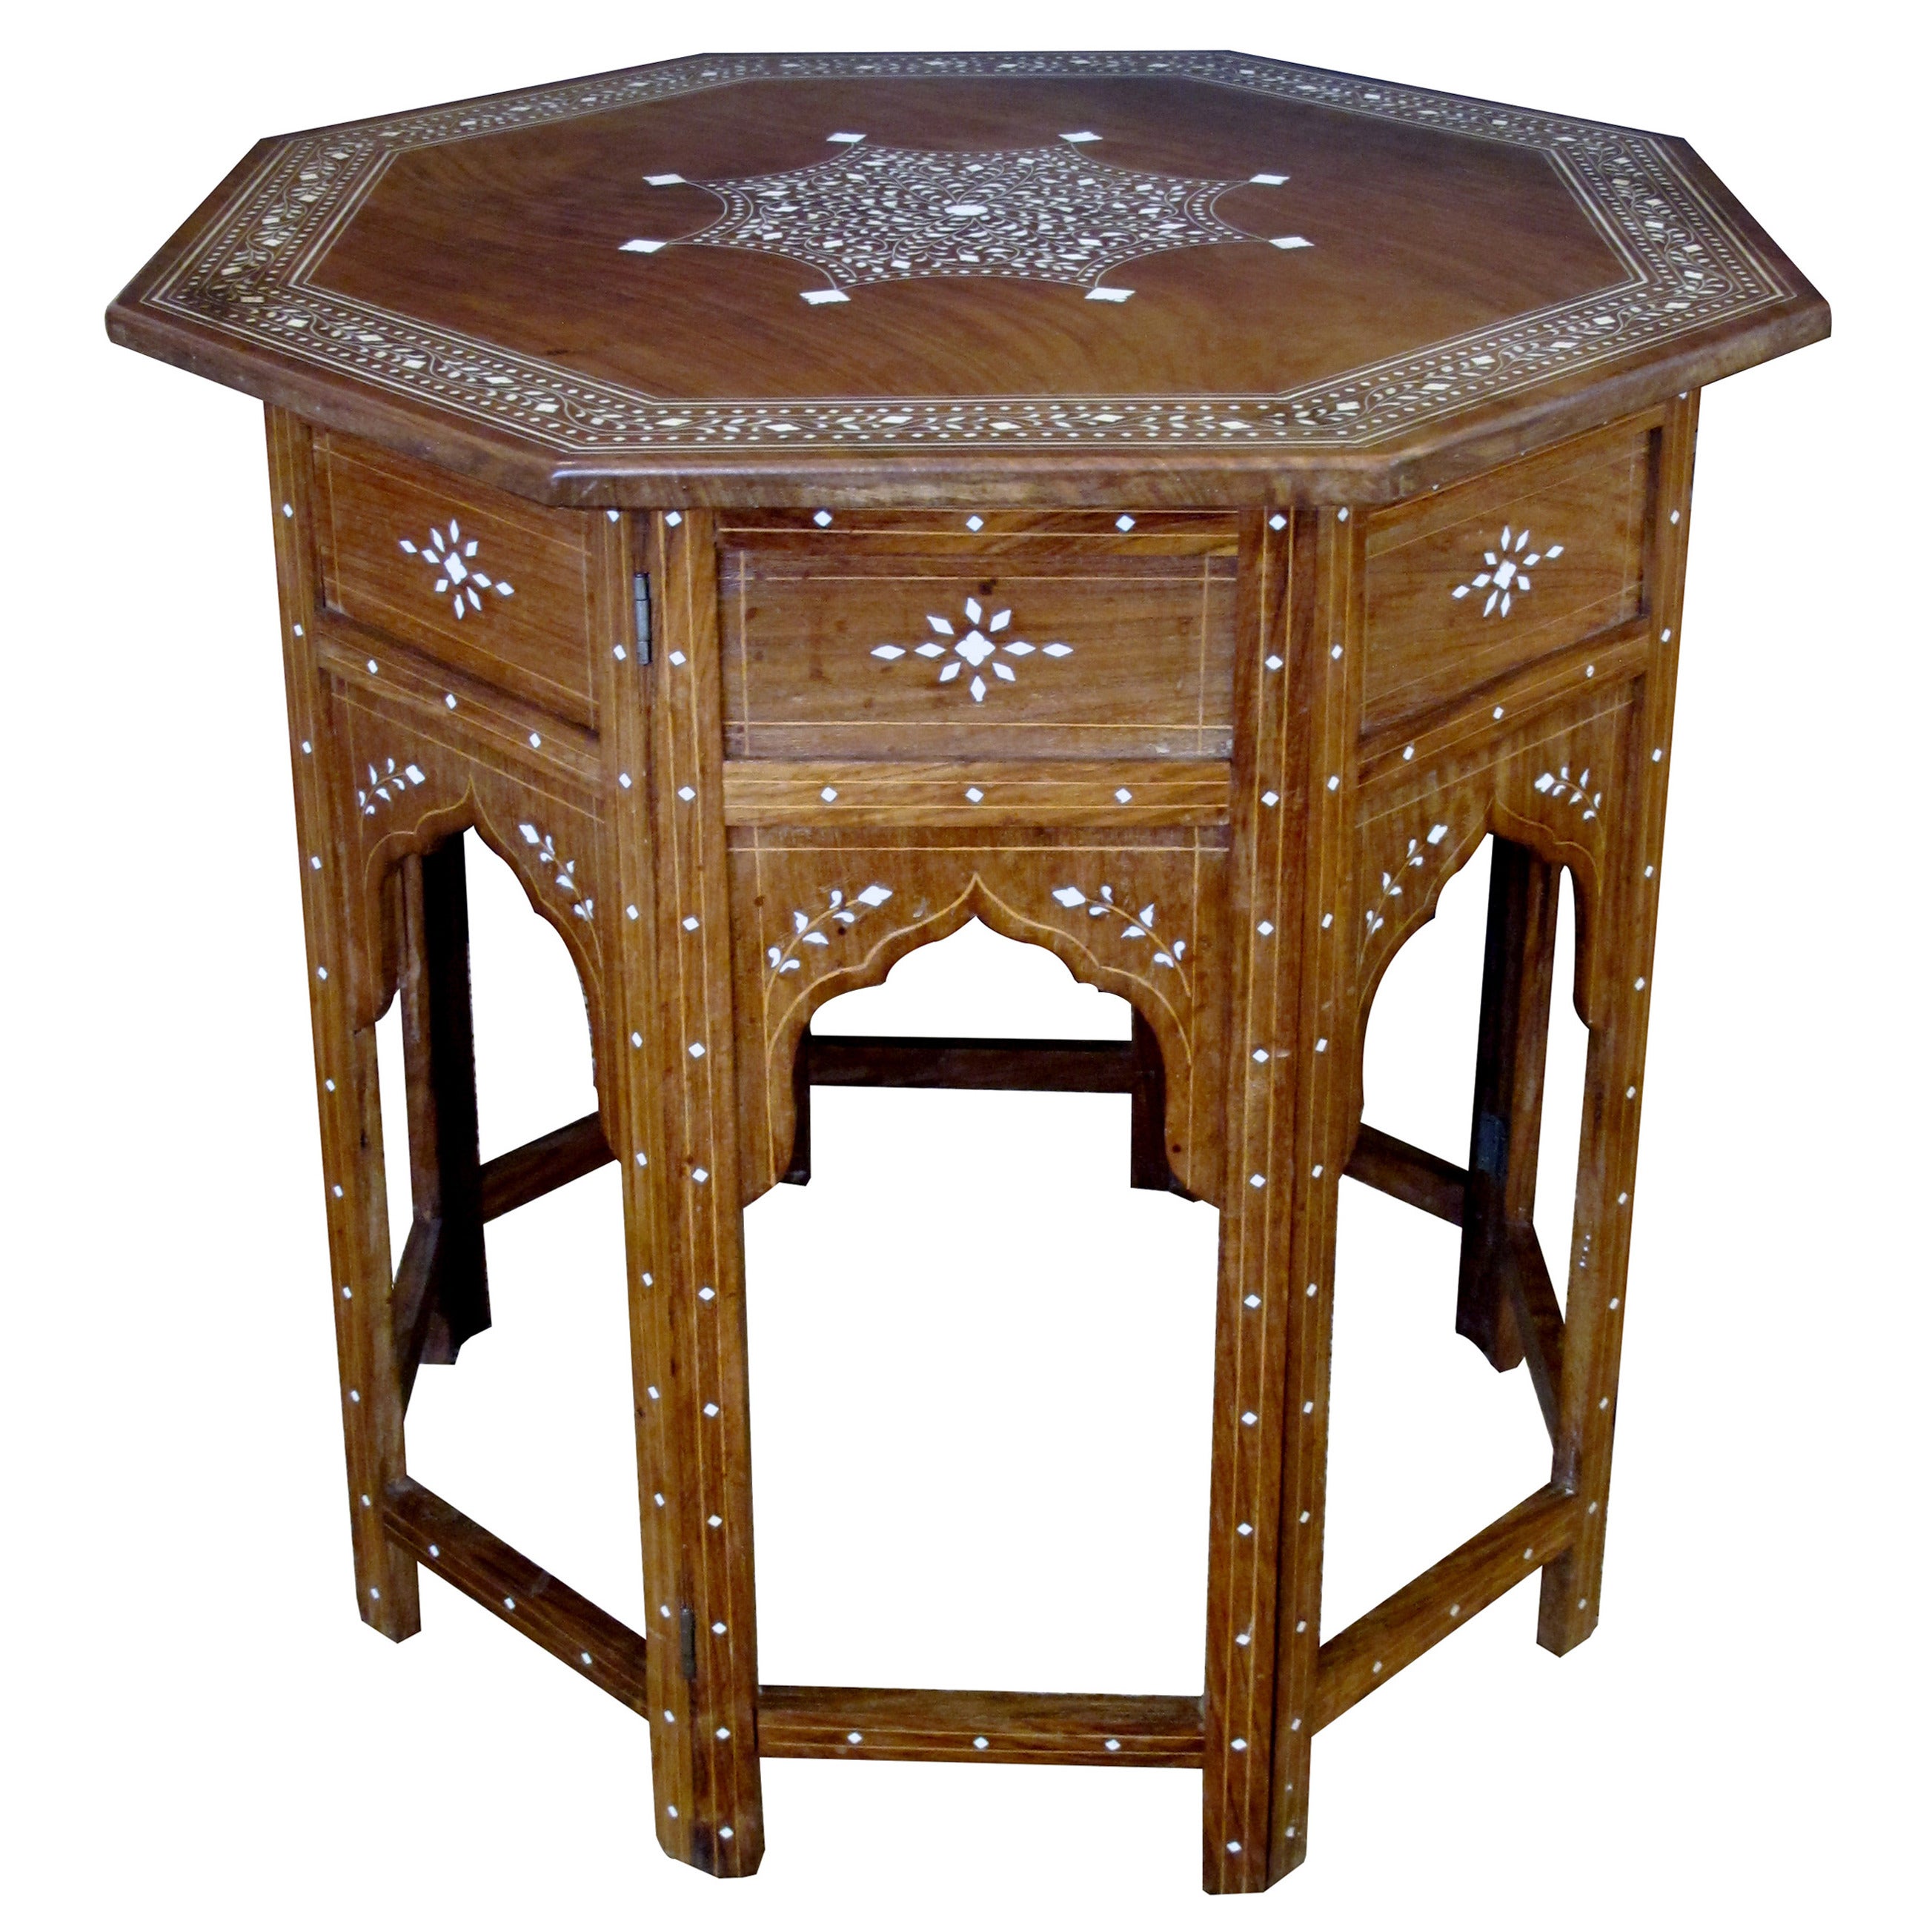 Inlaid Anglo-Indian Octagonal Traveling Table